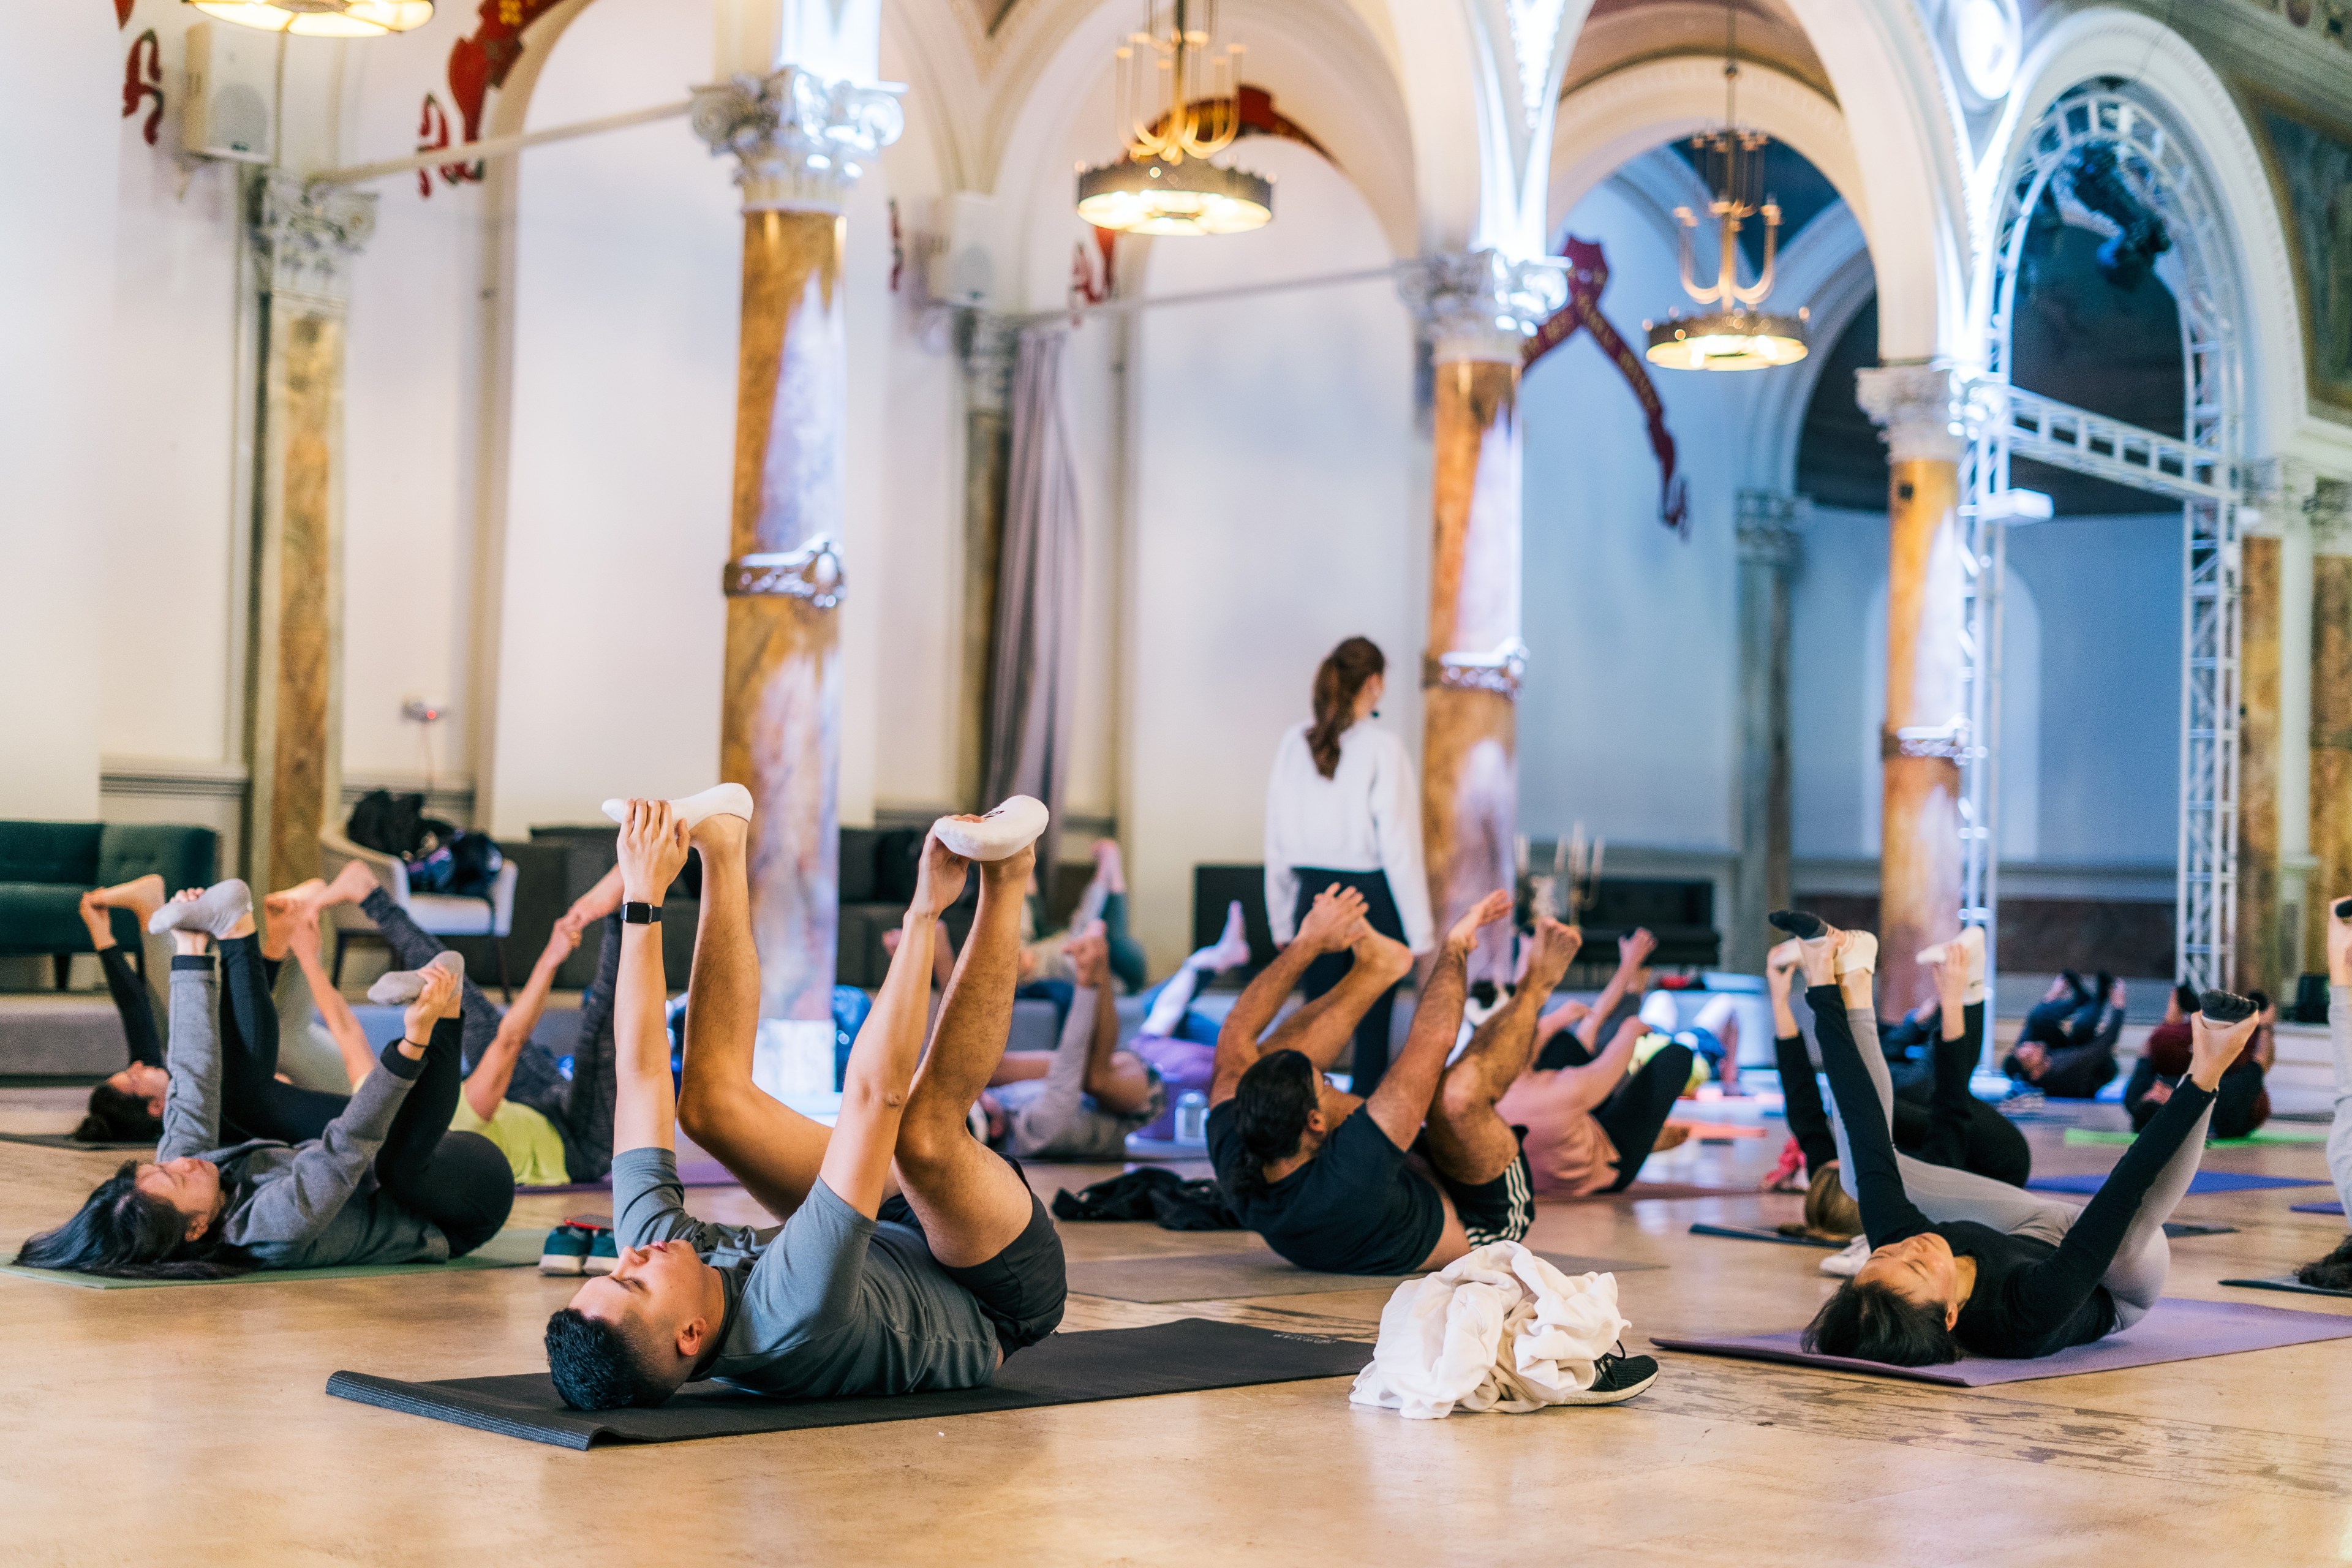 A group is practicing yoga in an elegant, high-ceilinged room with arched windows.